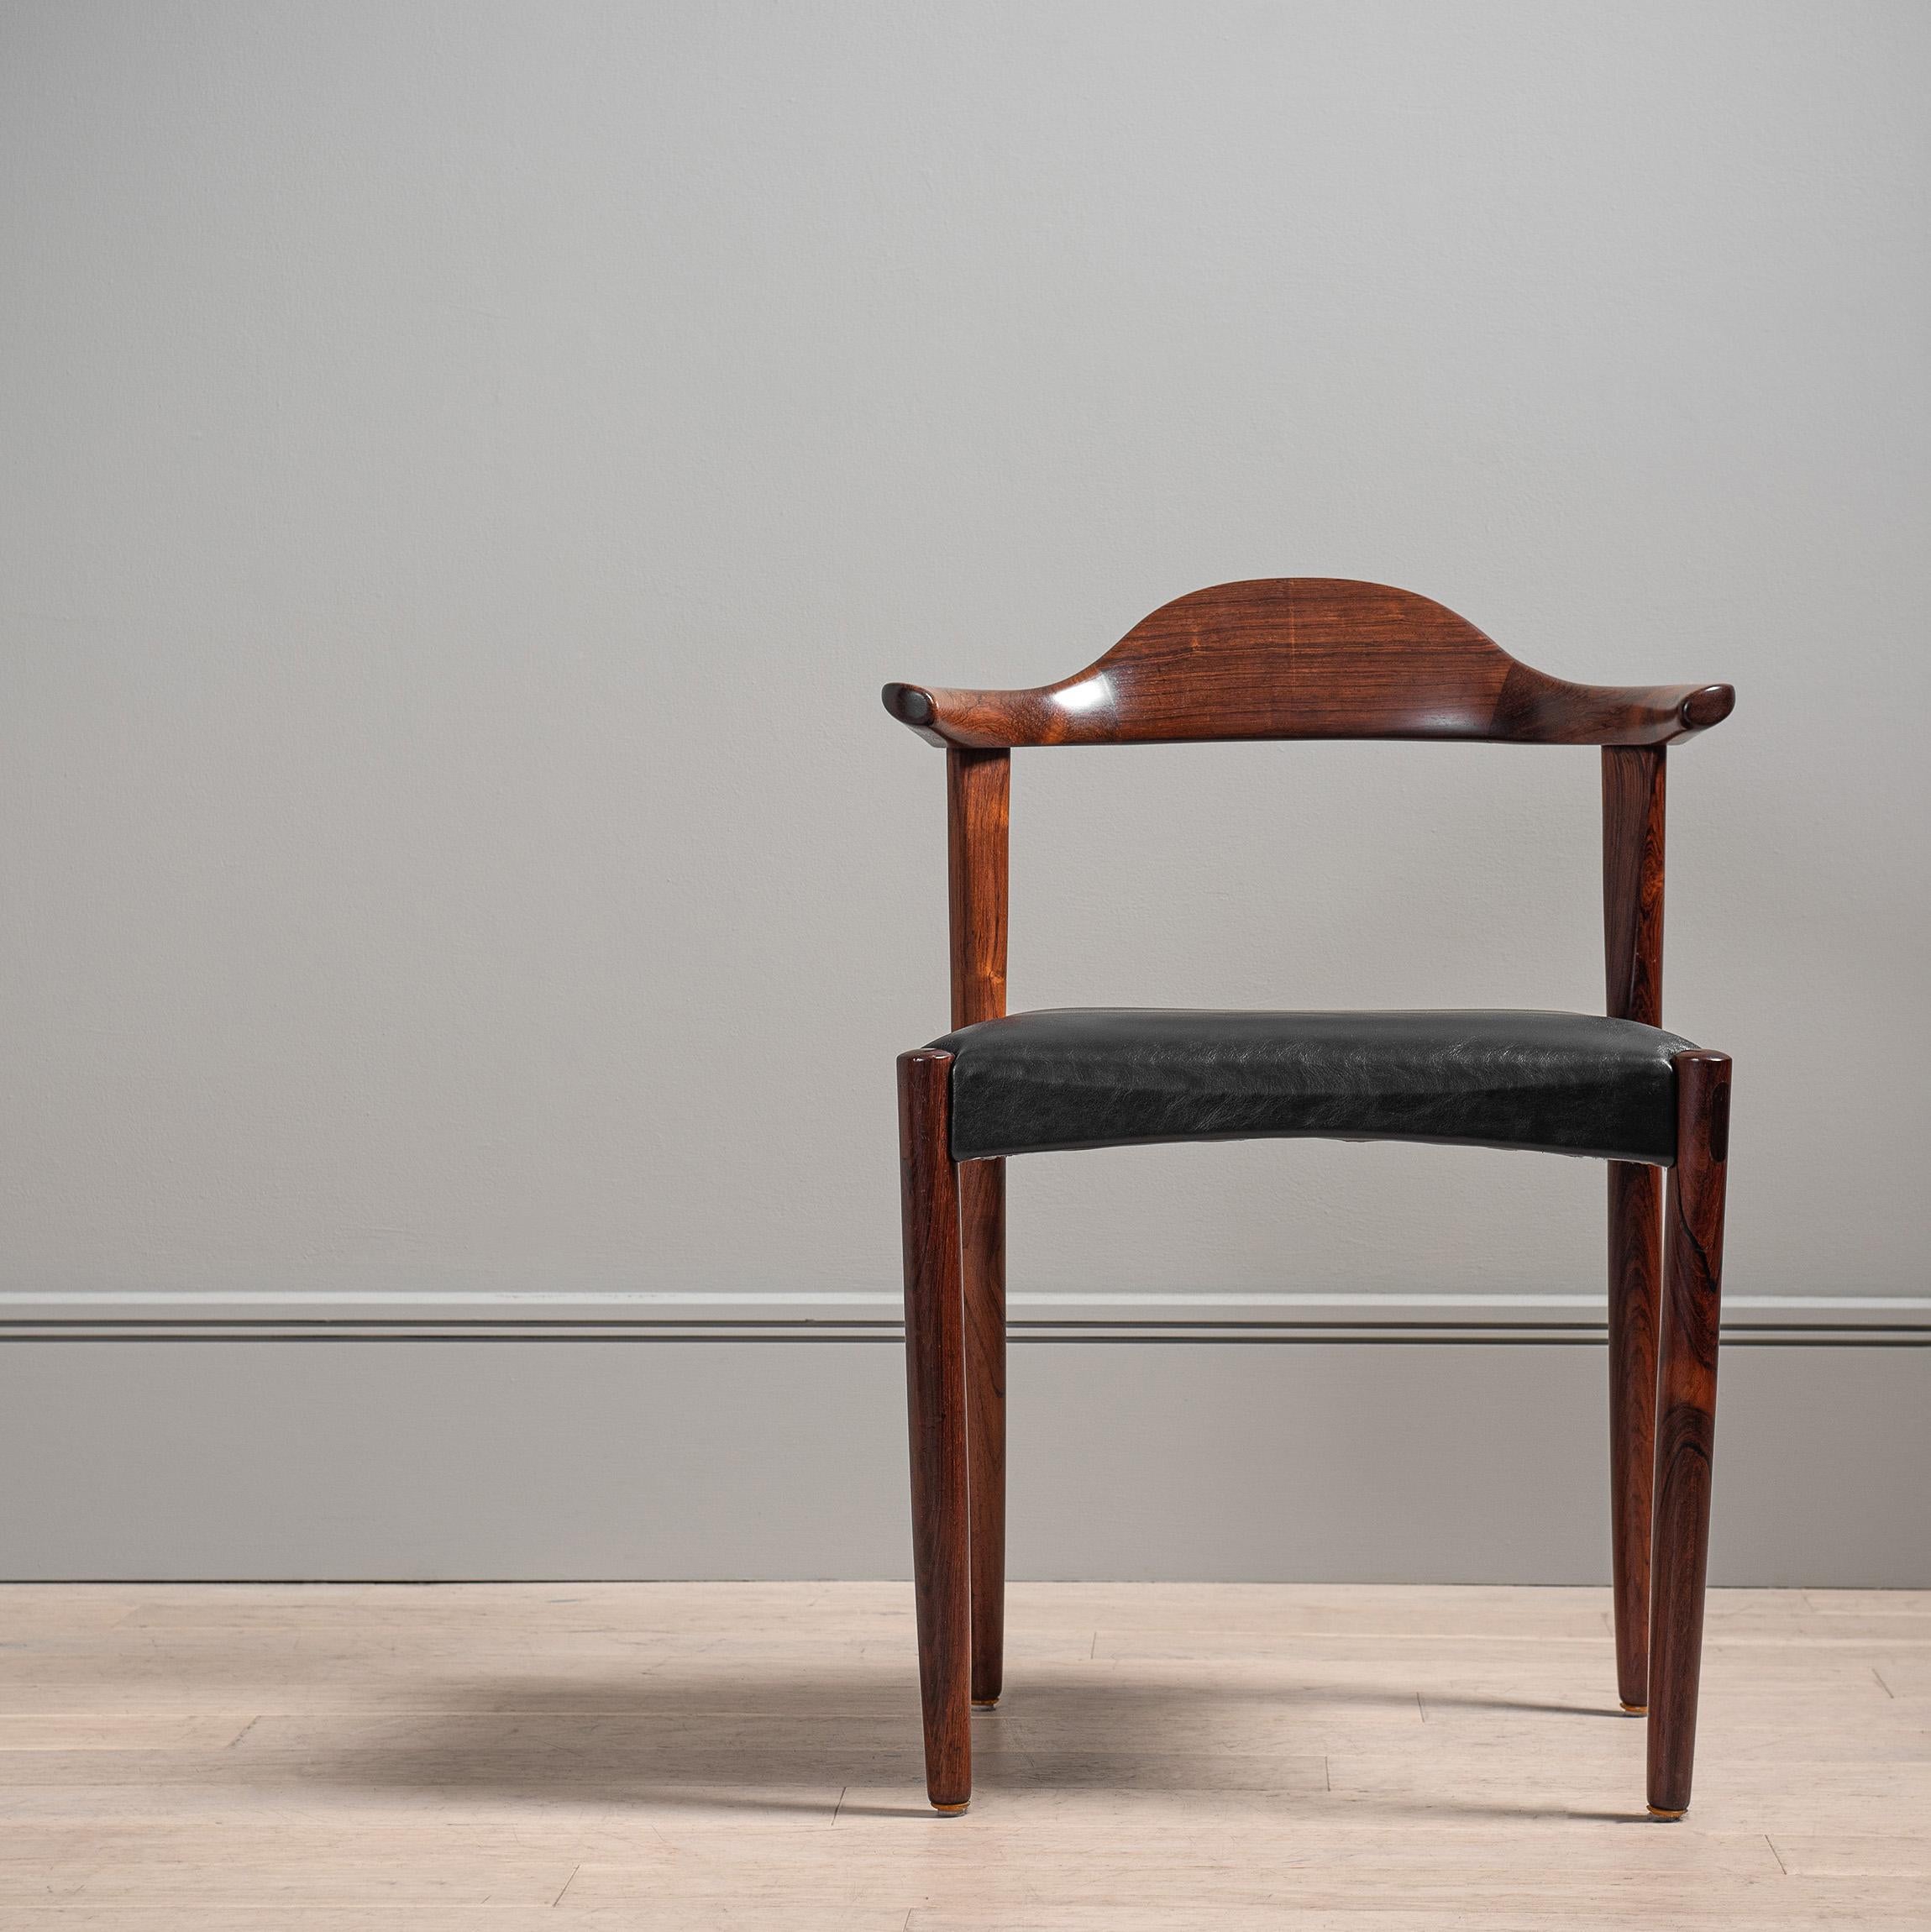 An absolutely stunning chair design by Jacob Herman and executed perfectly by Randers, Denmark circa 1950's. Wonderful curved sculptural bull-horn arms and backrest. The craftsmanship is outstanding. Soft black new leather upholstery.